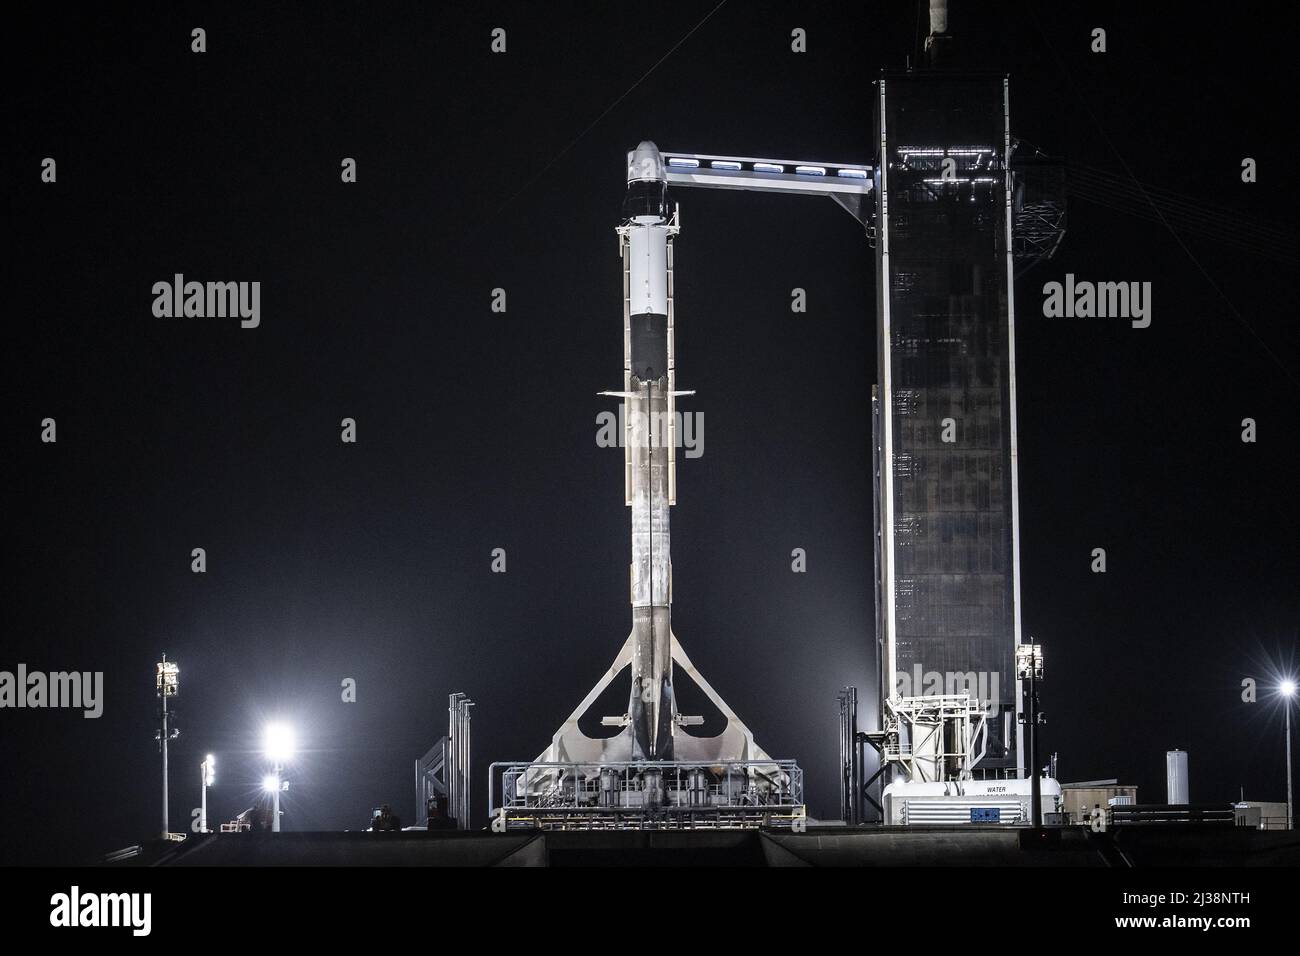 SpaceX's Falcon 9 and Dragon spacecraft are vertical at the historic Launch Complex 39A (LC-39A) at NASA's Kennedy Space Center. SpaceX is targeting Friday, April 8, to launch Axiom Space's Ax-1 mission to the International Space Station. The Ax-1 crew of Michael López-Alegría, a retired NASA astronaut; Larry Connor, a real estate and technology entrepreneur; Mark Pathy, a Canadian businessman; and Eytan Stibbe, an Israeli entrepreneur and former fighter jet pilot, will spend ten days on the orbiting laboratory. Axiom Space's Ax-1 mission is the first all-private human spaceflight mission to t Stock Photo